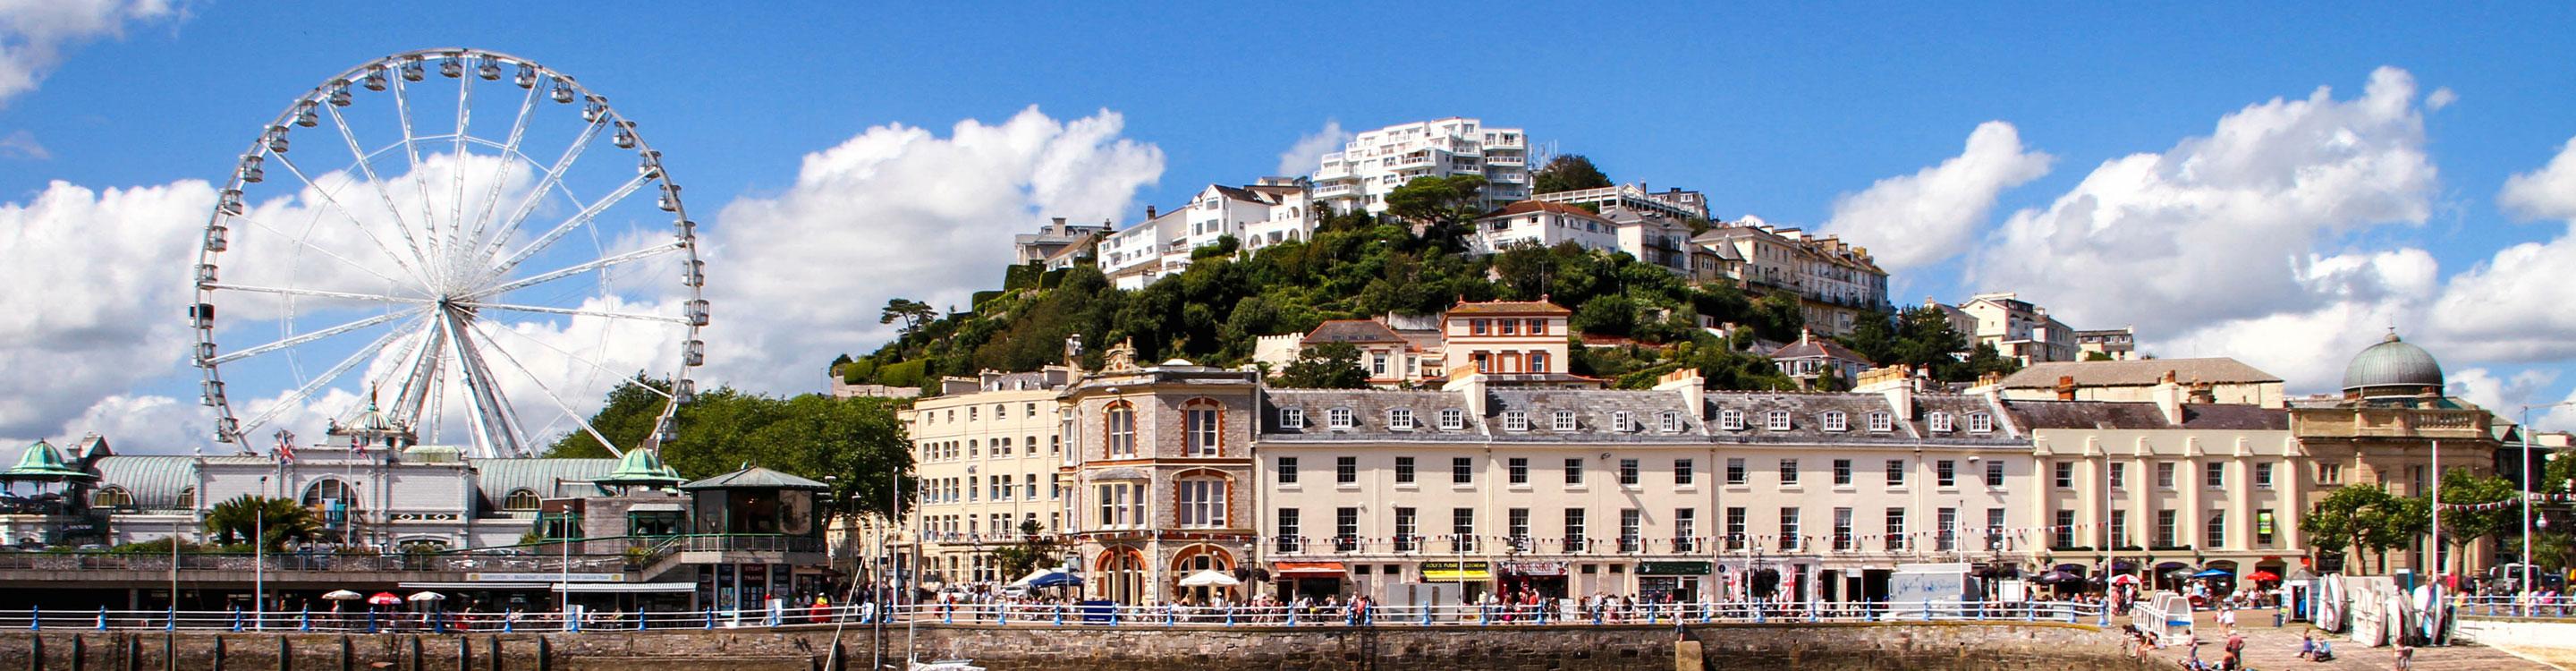 Torquay pictured from across water on a bright day